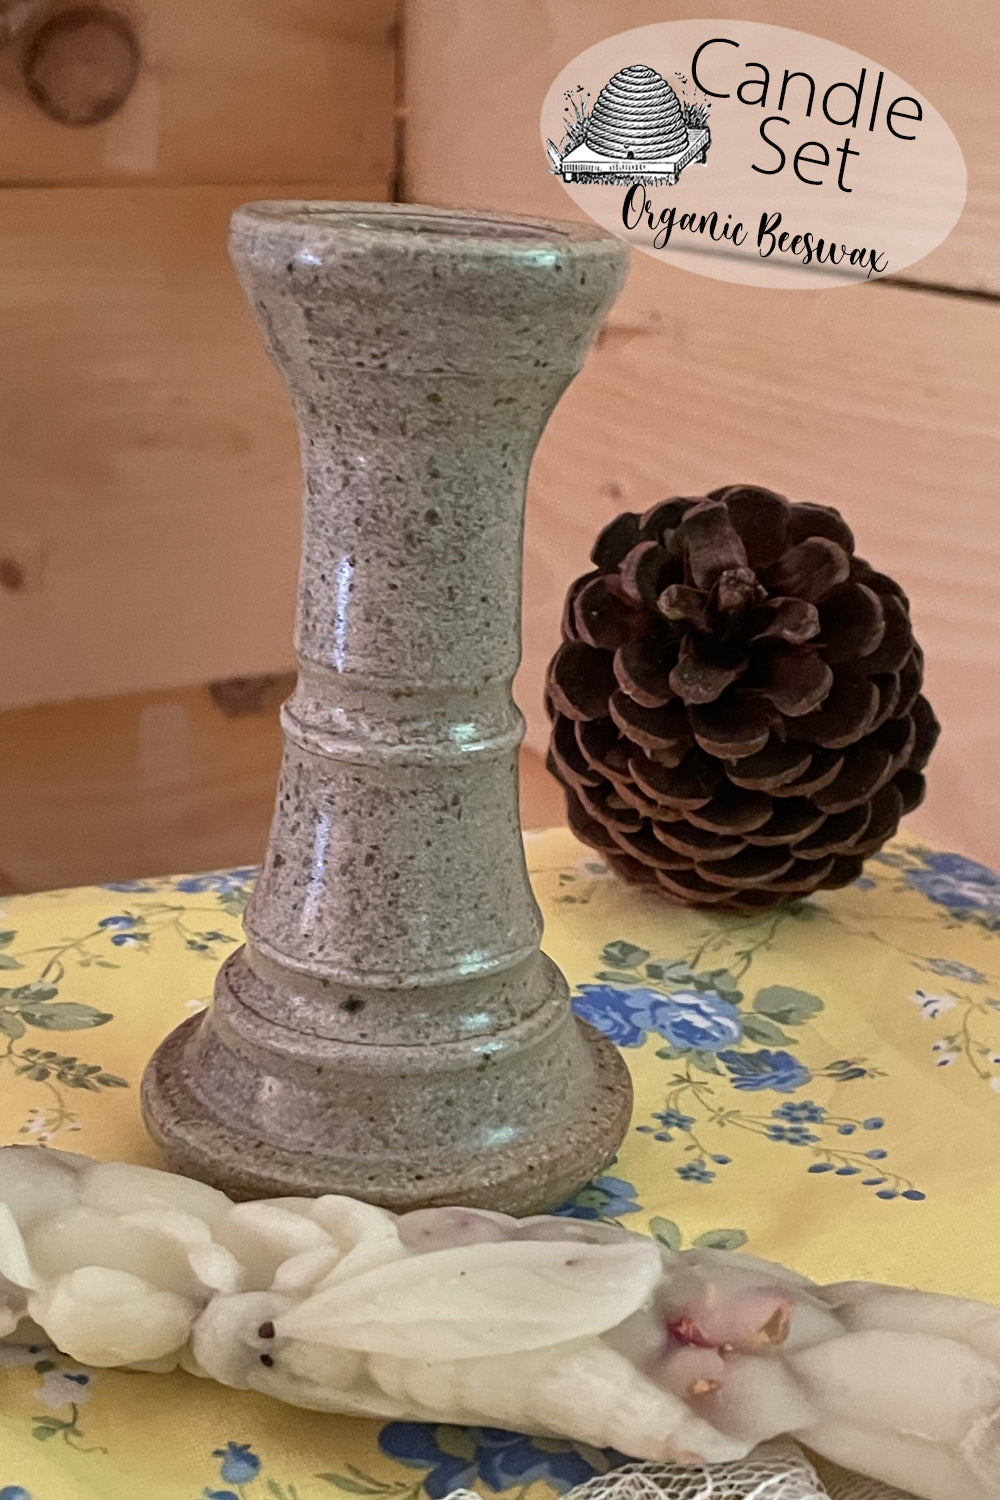 candlestick set- pottery candle stick and hand poured beeswax candle